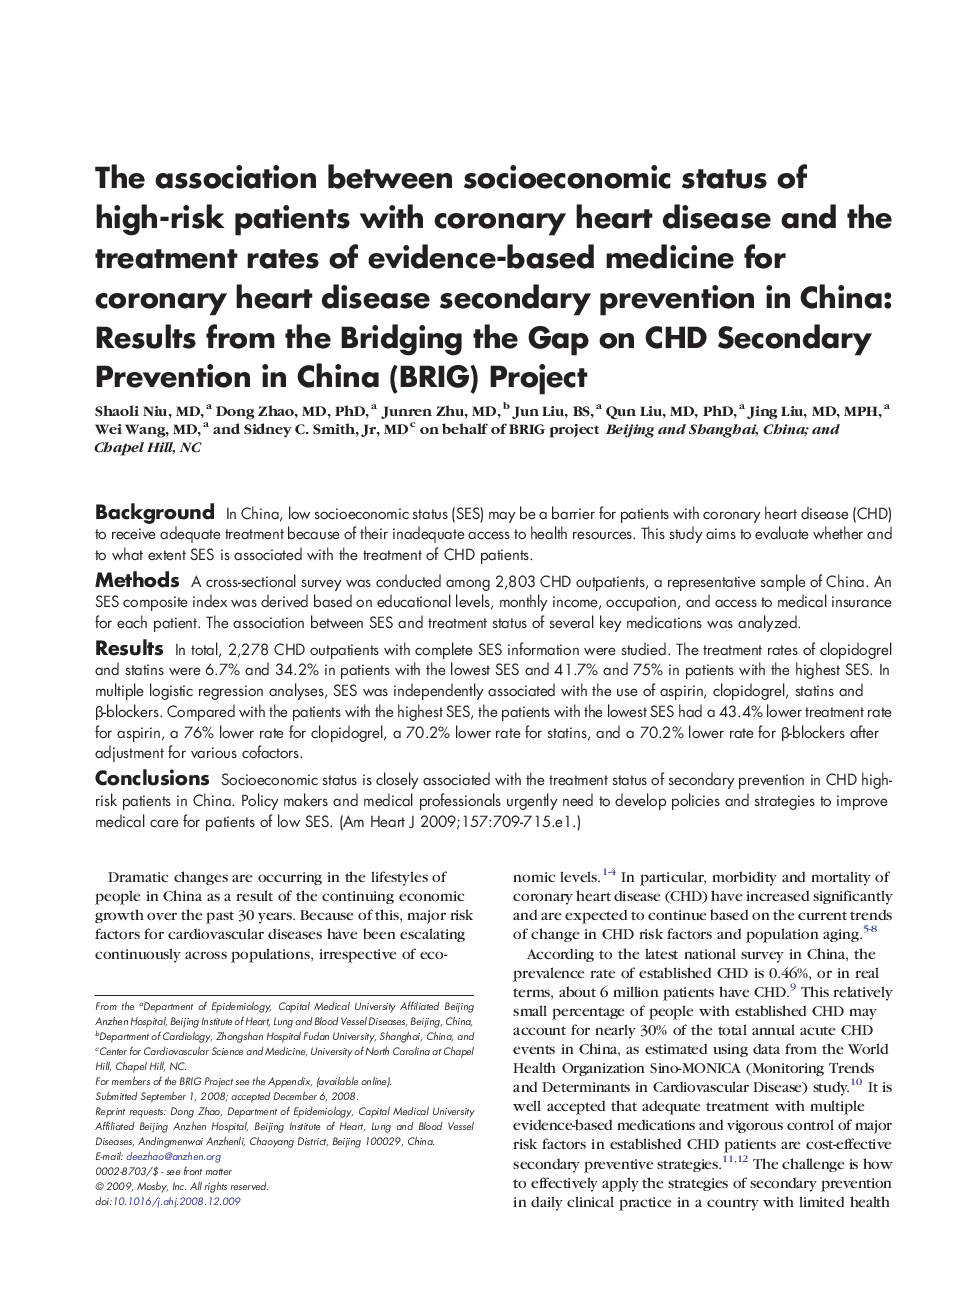 The association between socioeconomic status of high-risk patients with coronary heart disease and the treatment rates of evidence-based medicine for coronary heart disease secondary prevention in China: Results from the Bridging the Gap on CHD Secondary 